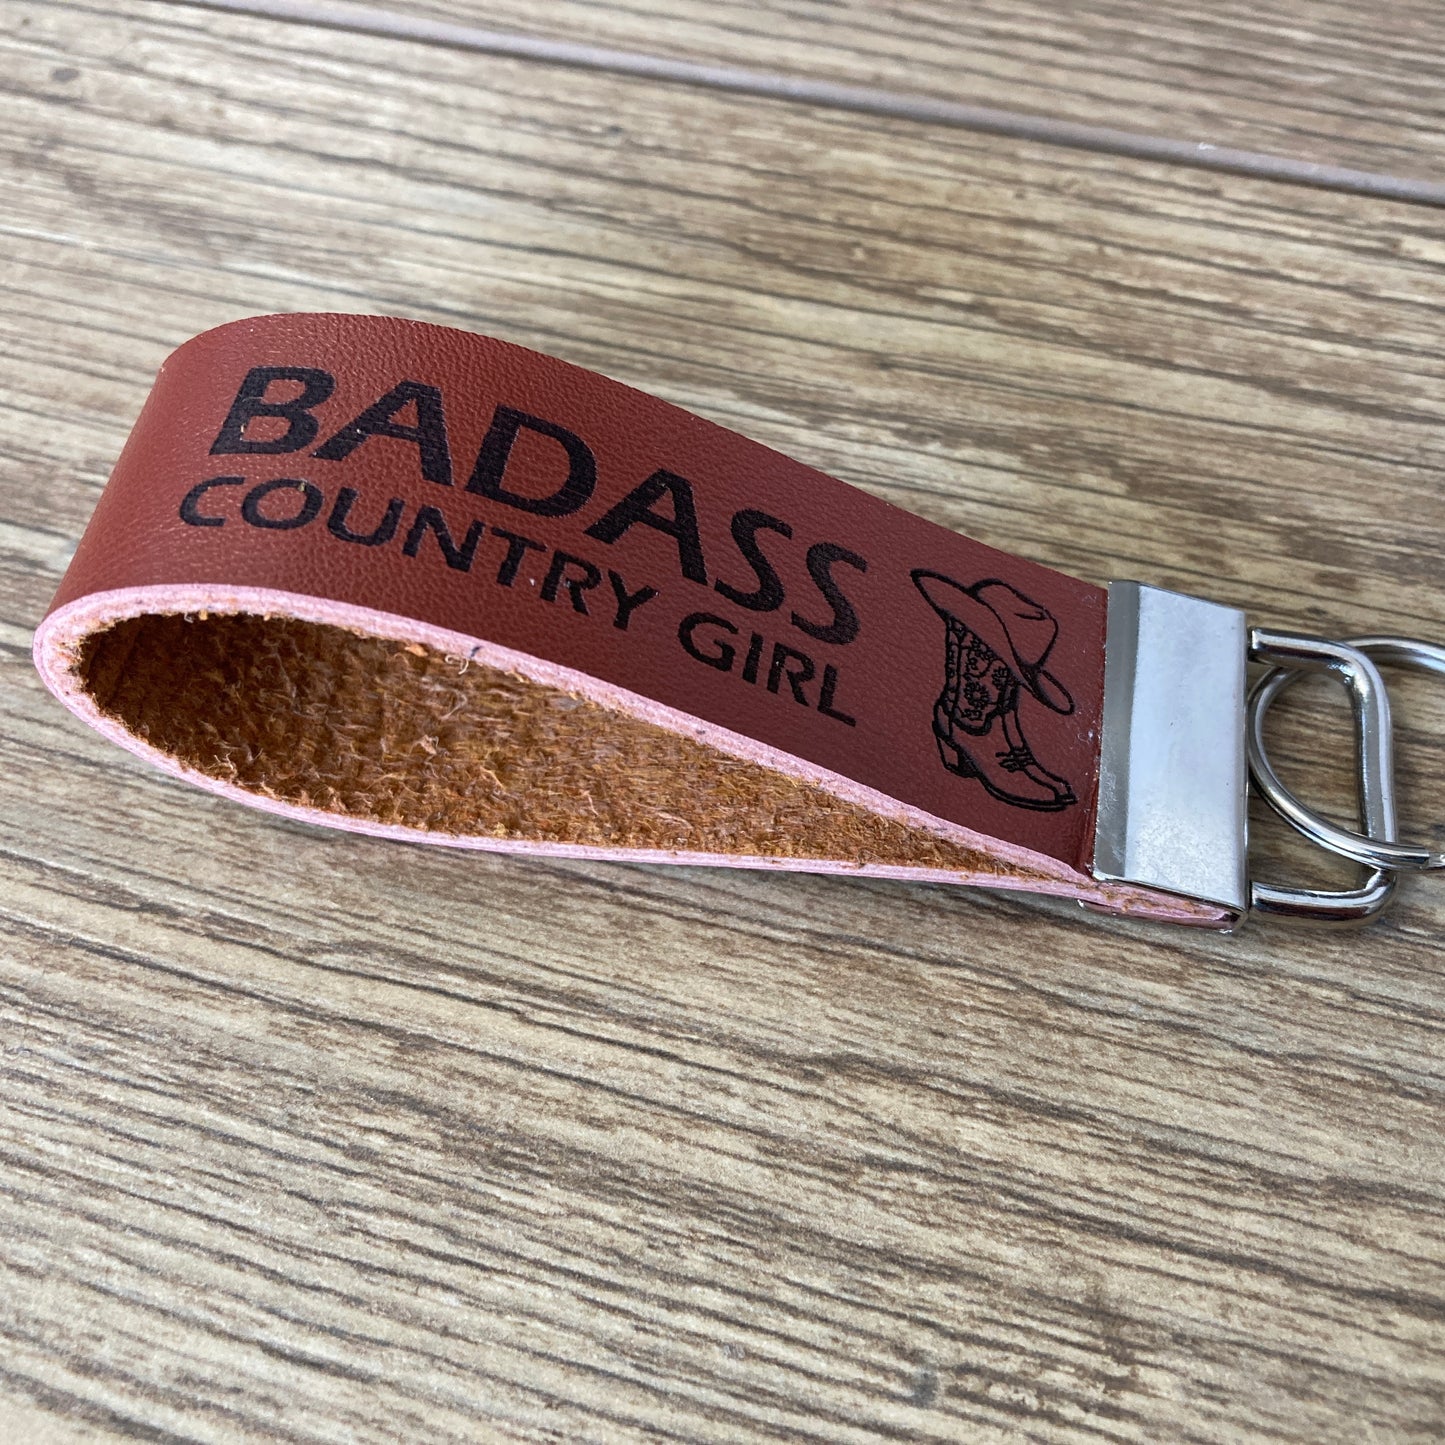 Badass Country Girl (Boots and Hat) Leather Keychain